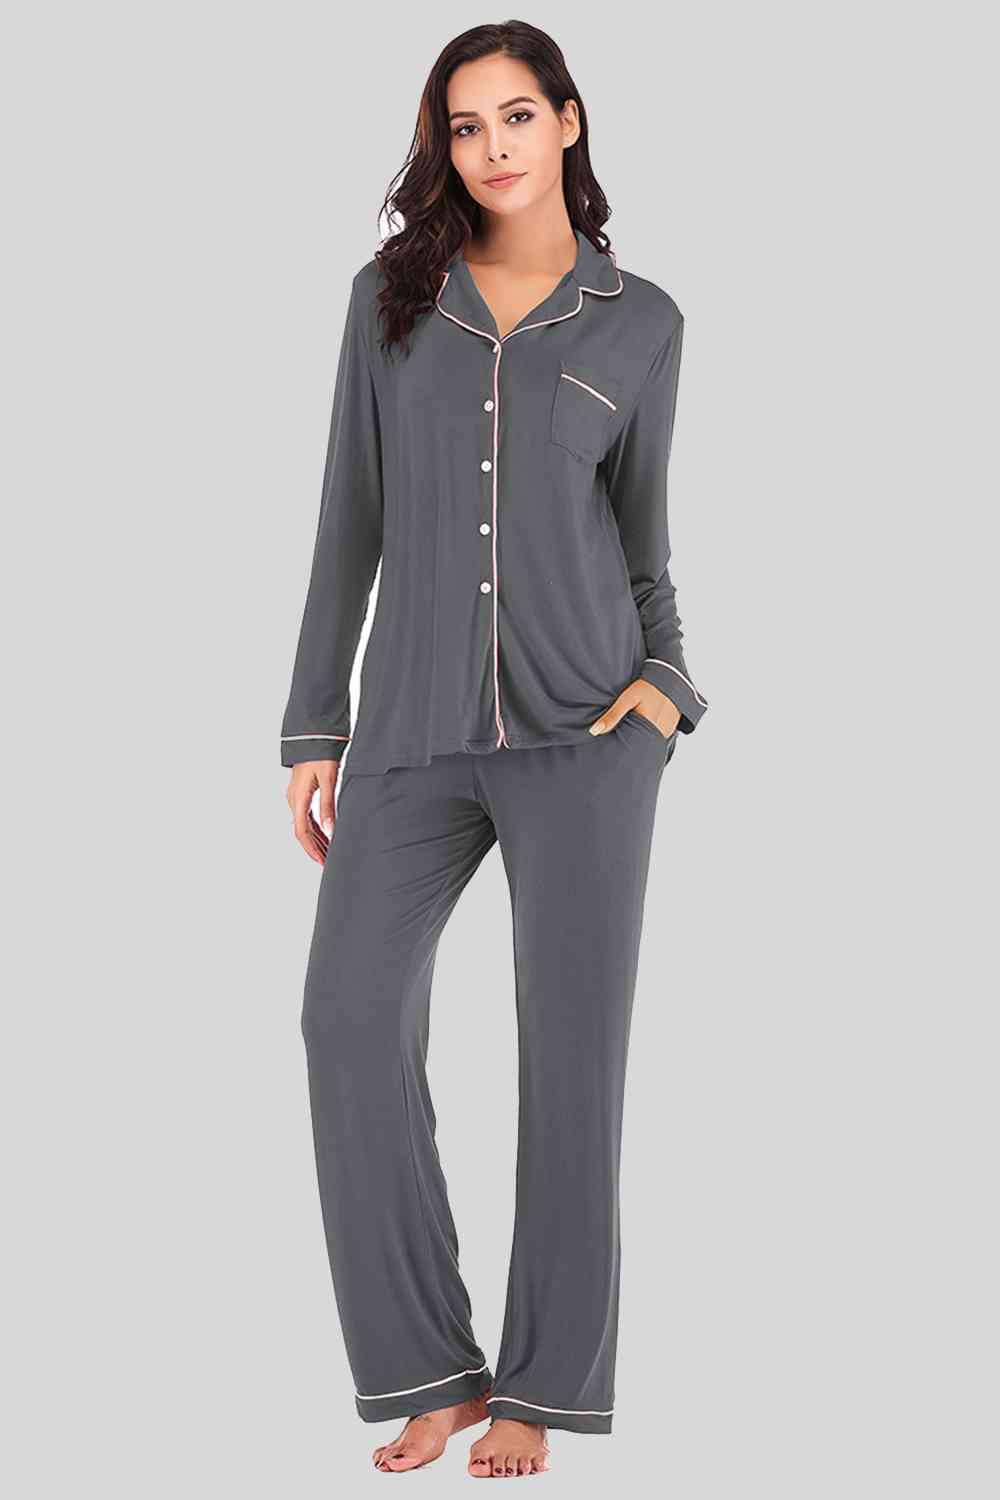 Collared Neck Long Sleeve Loungewear Set with Pockets Charcoal / S